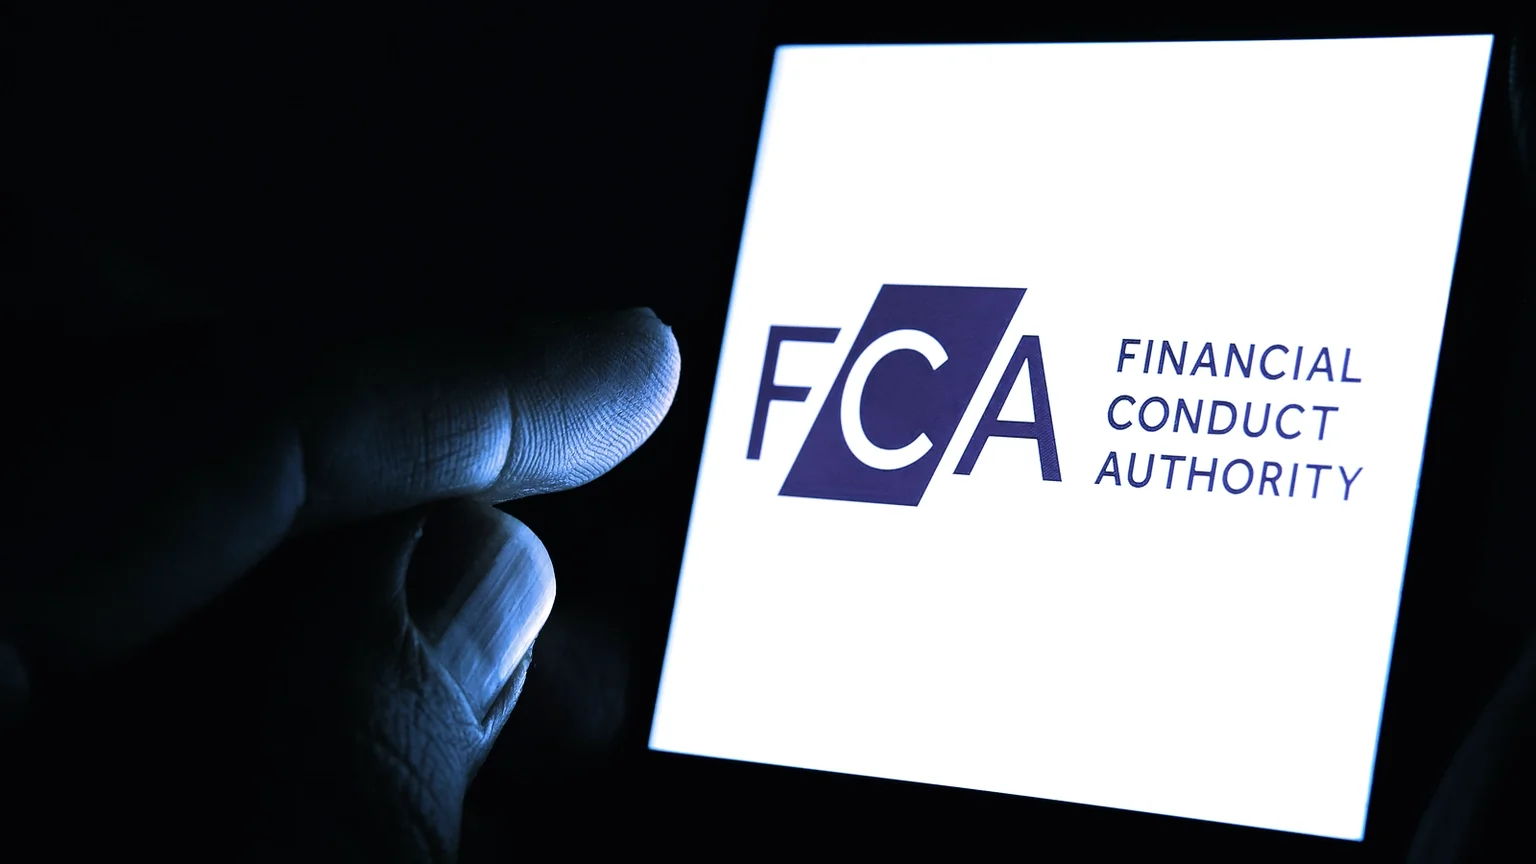 The UK's financial conduct authority supervises cryptoasset activities in the country (Image: Shutterstock)